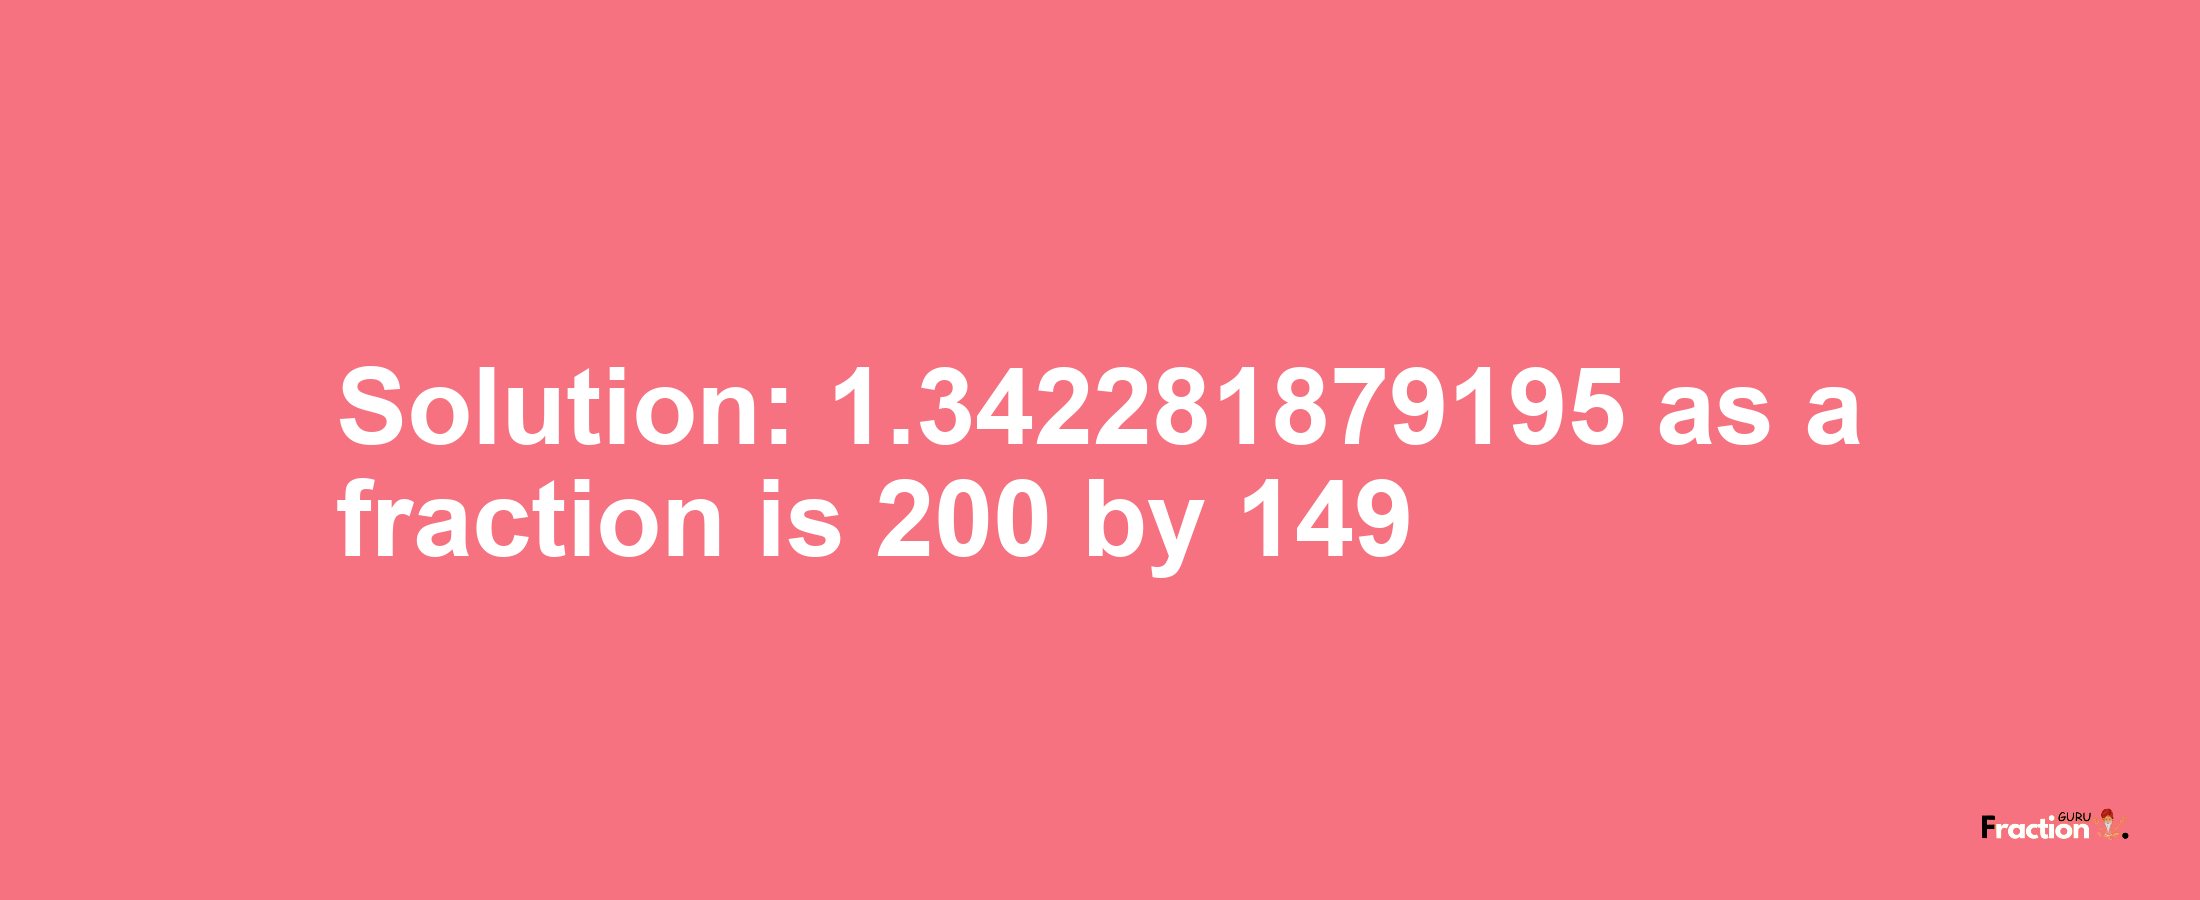 Solution:1.342281879195 as a fraction is 200/149